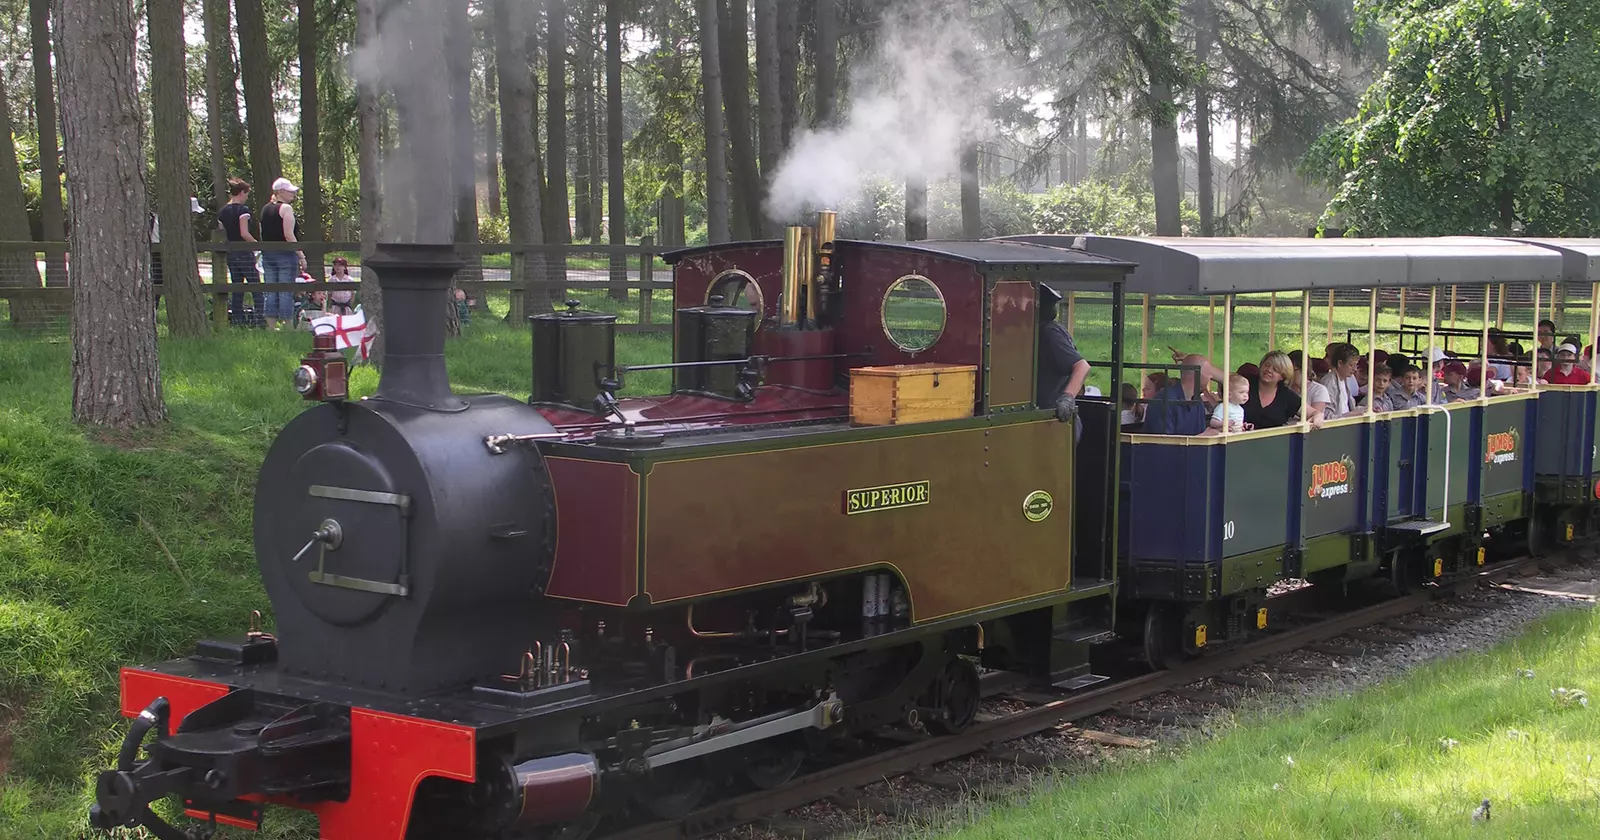 The Superior steam train with passengers on board at Whipsnade Zoo